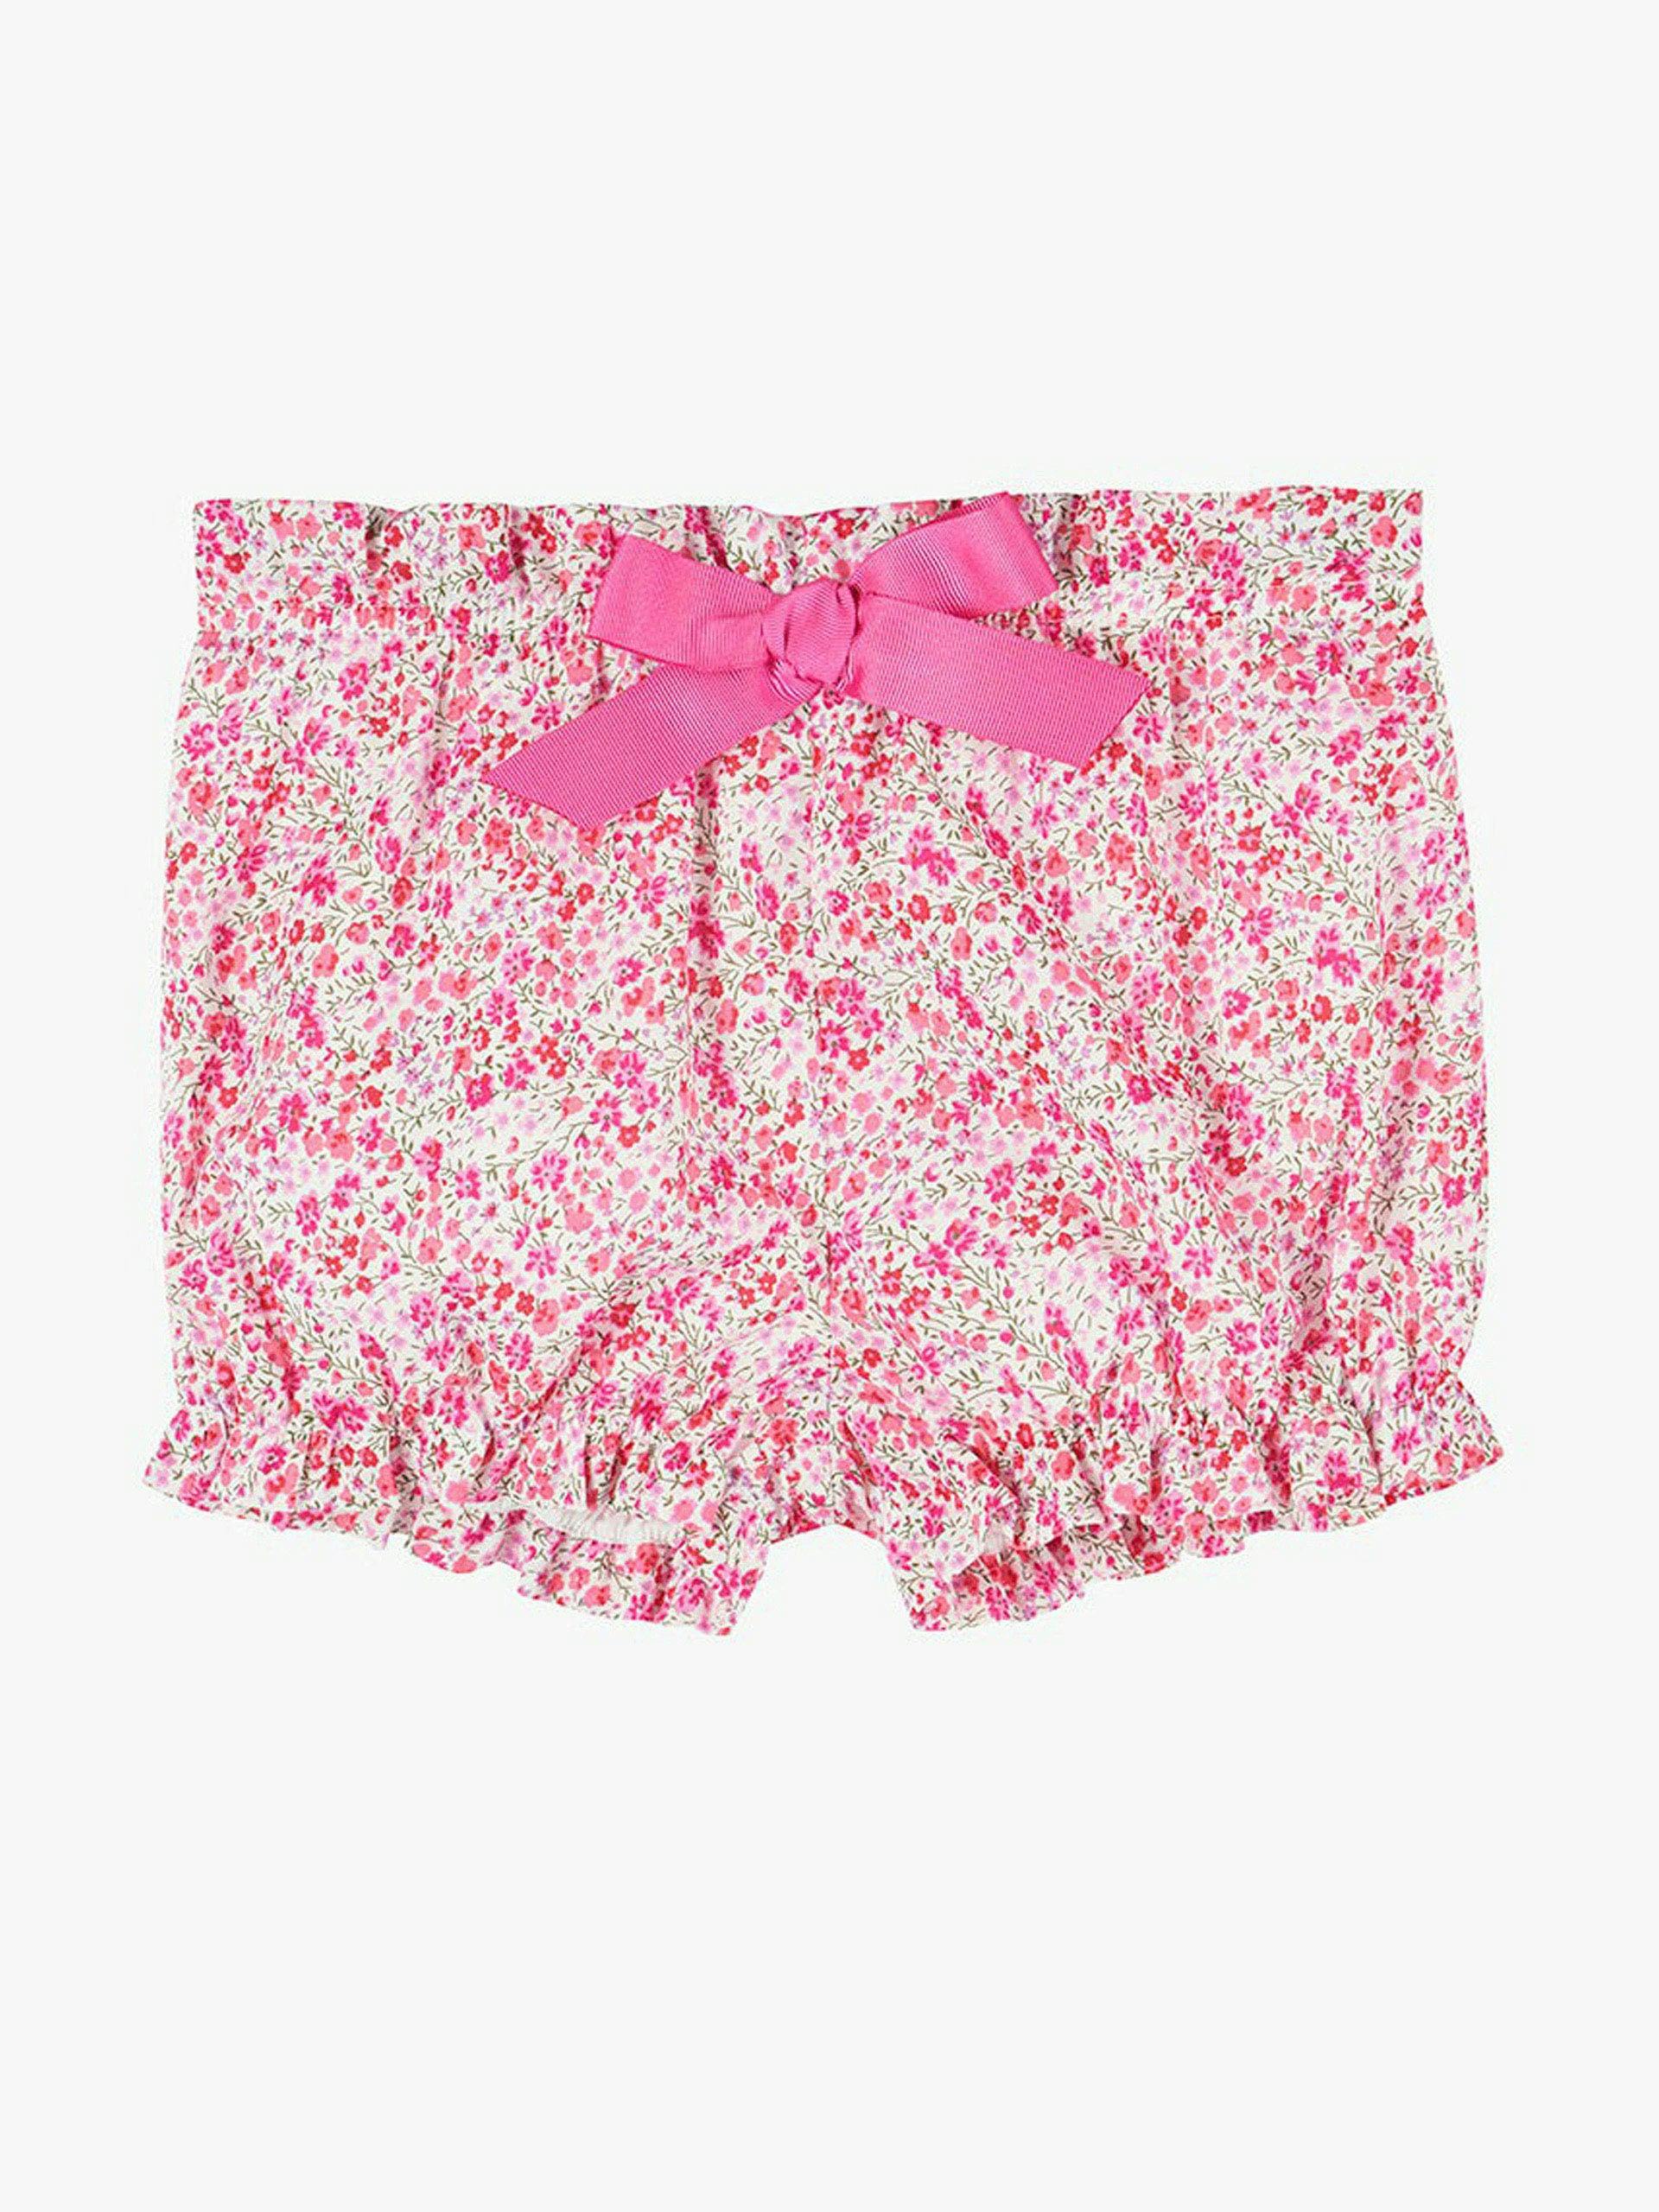 Little girls bloomers in pink Phoebe print